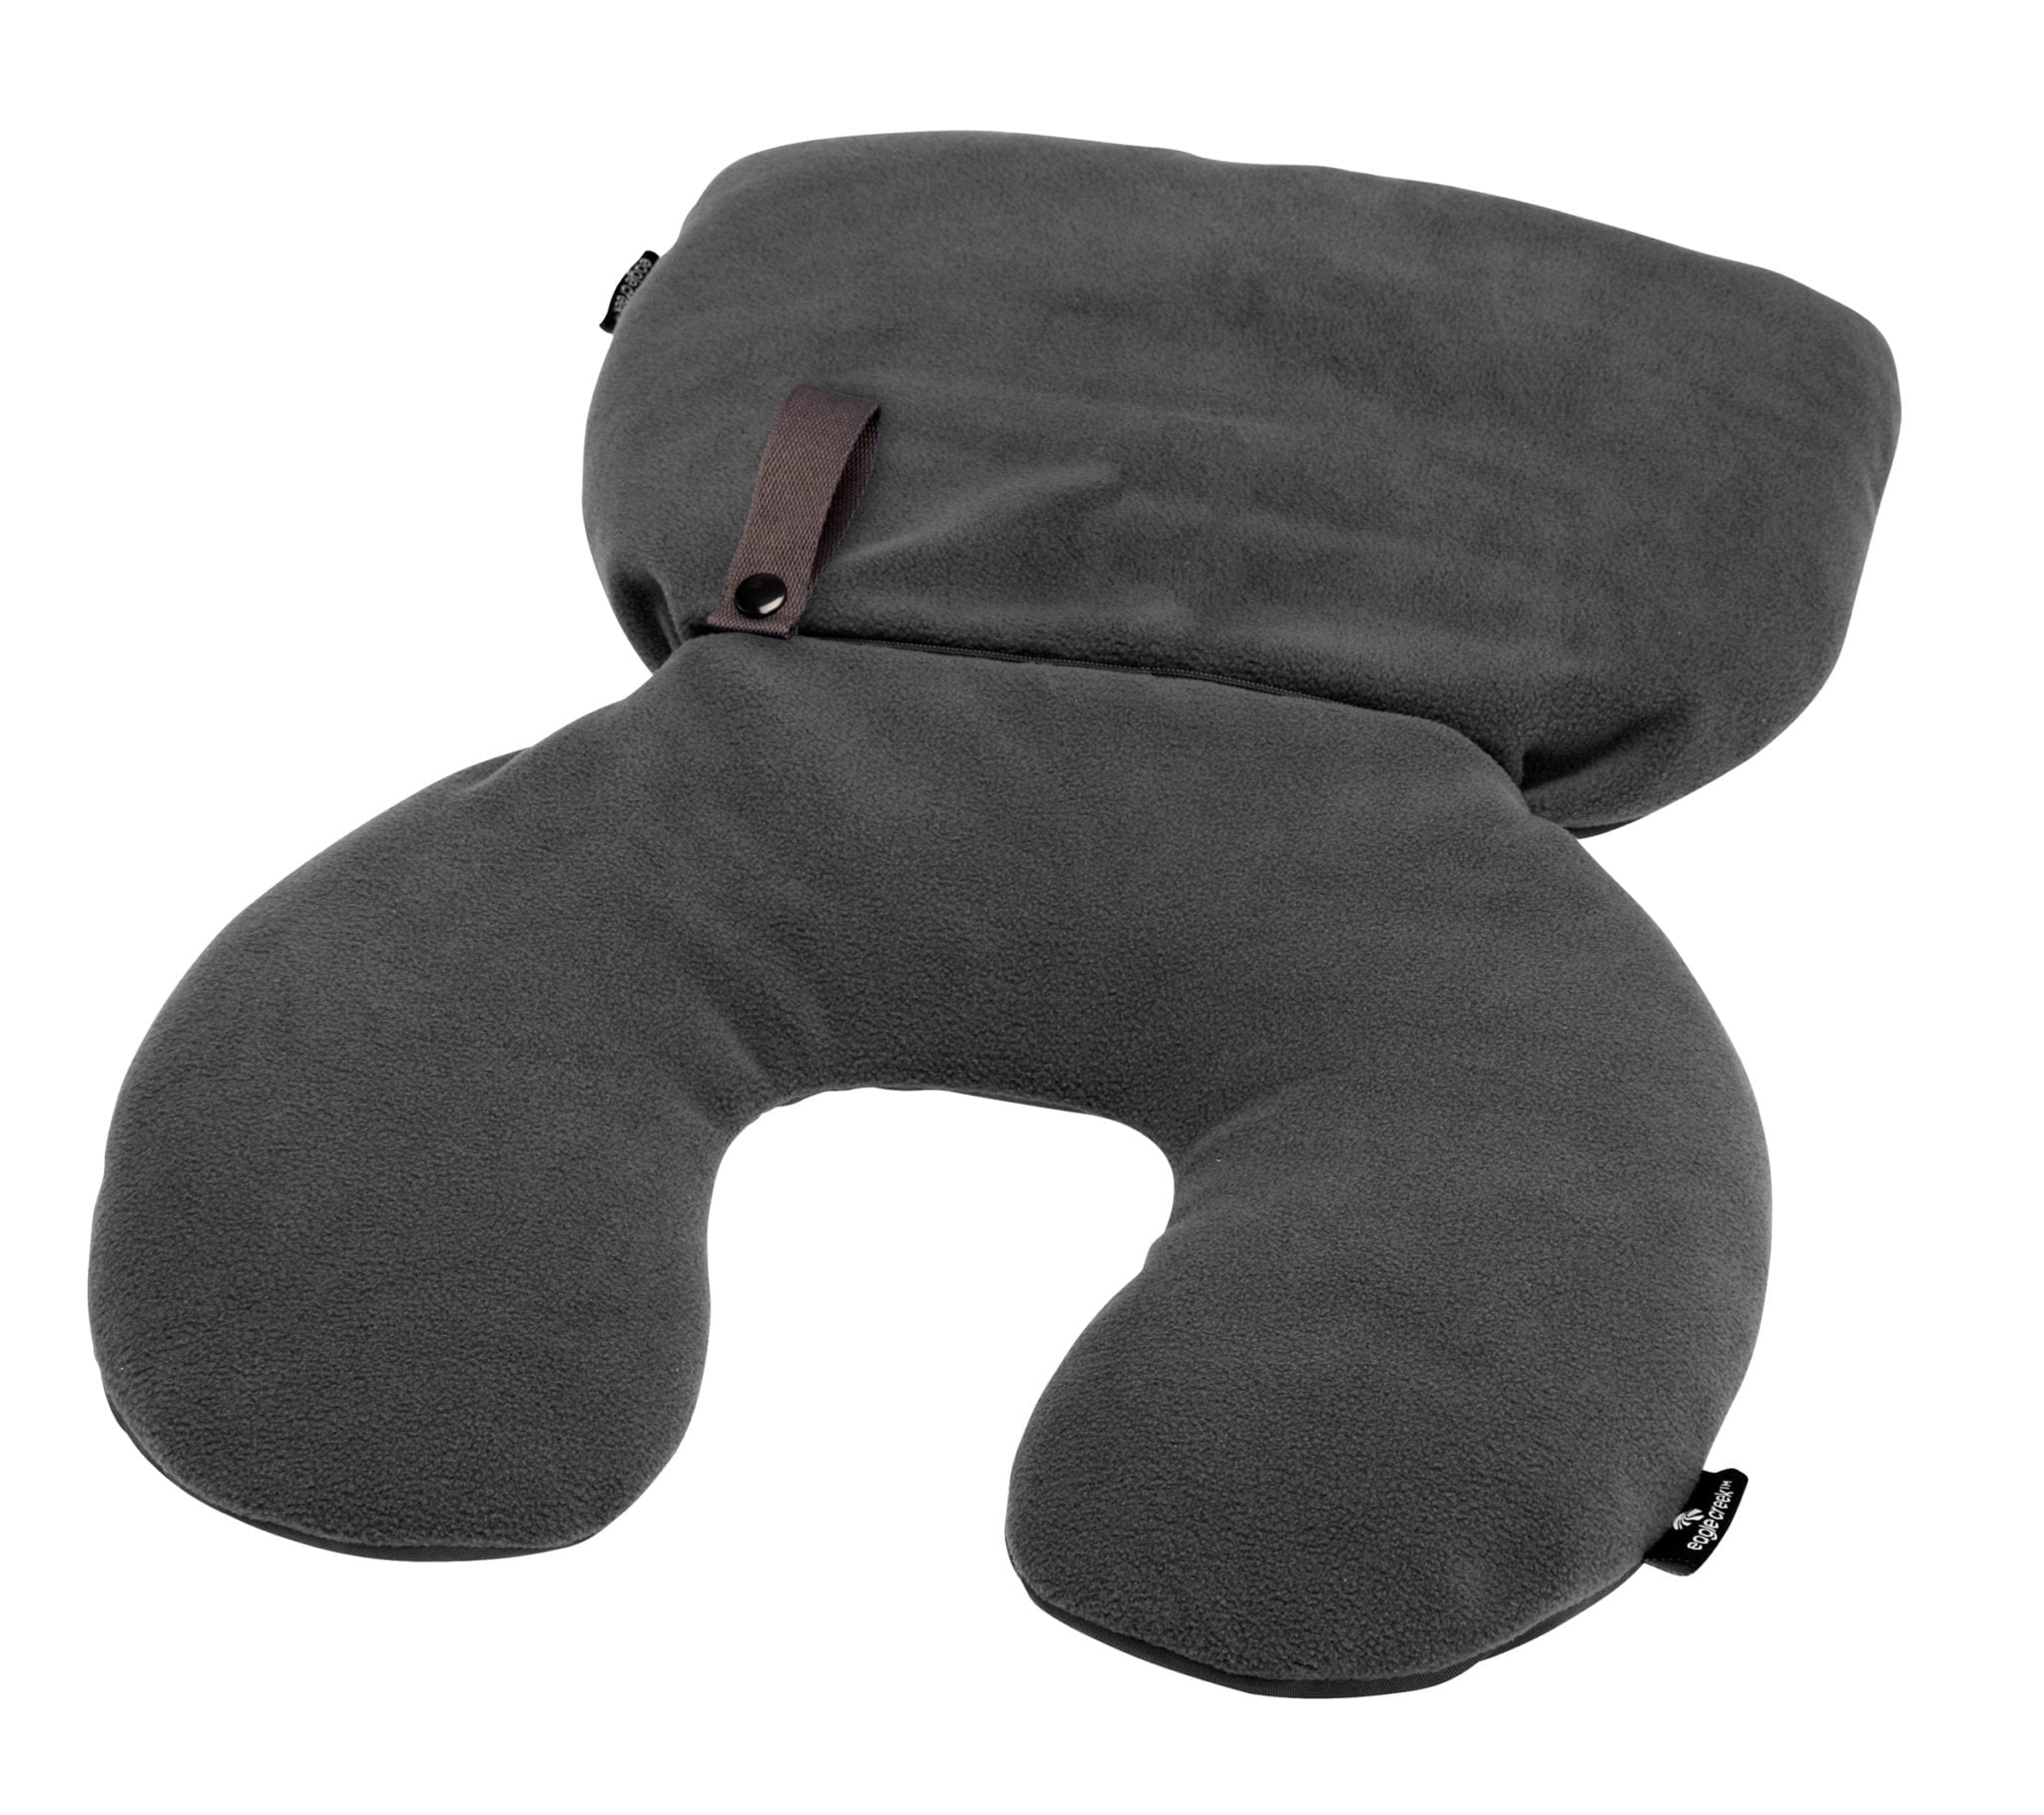 Eco friendly Eagle Creek brand grey versatile 2-in-1 travel pillow with neck roll and pillow.